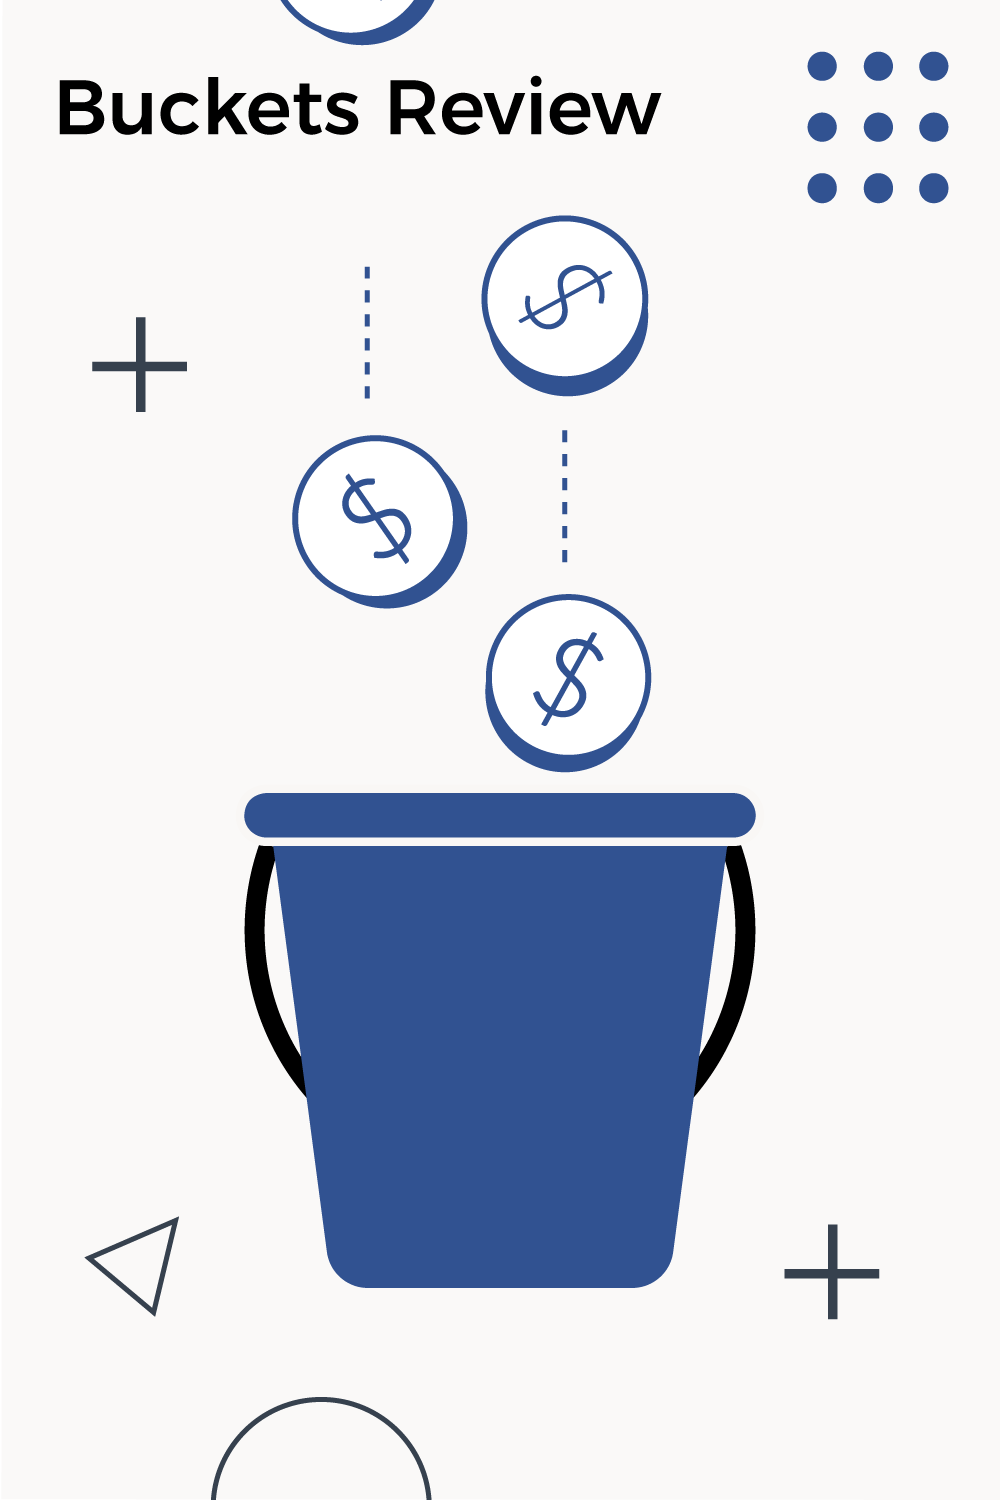 buckets review pinterest image